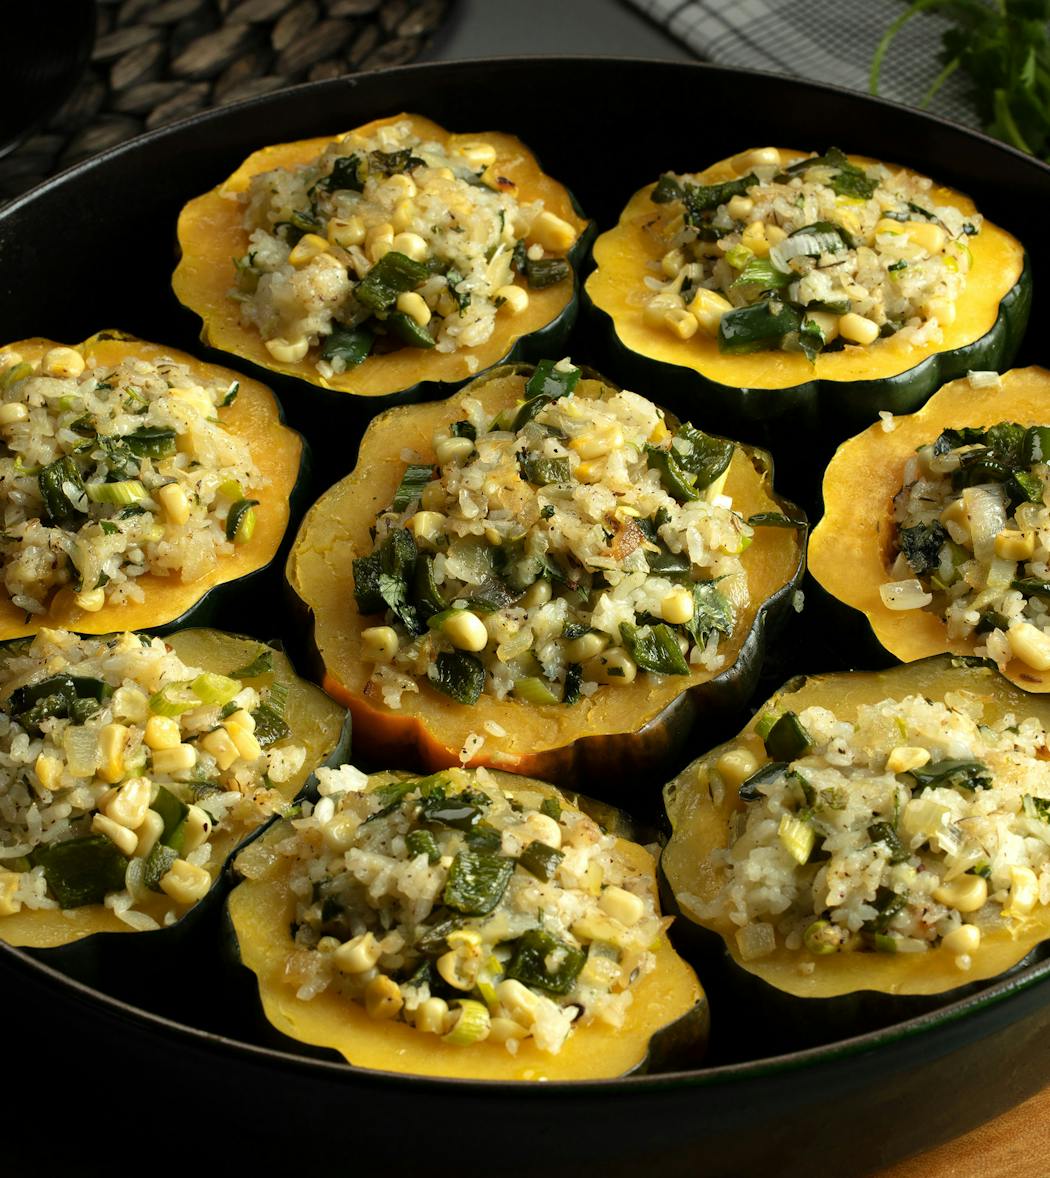 Acorn Squash With Cheesy Rice and Poblanos works as side or main dish.